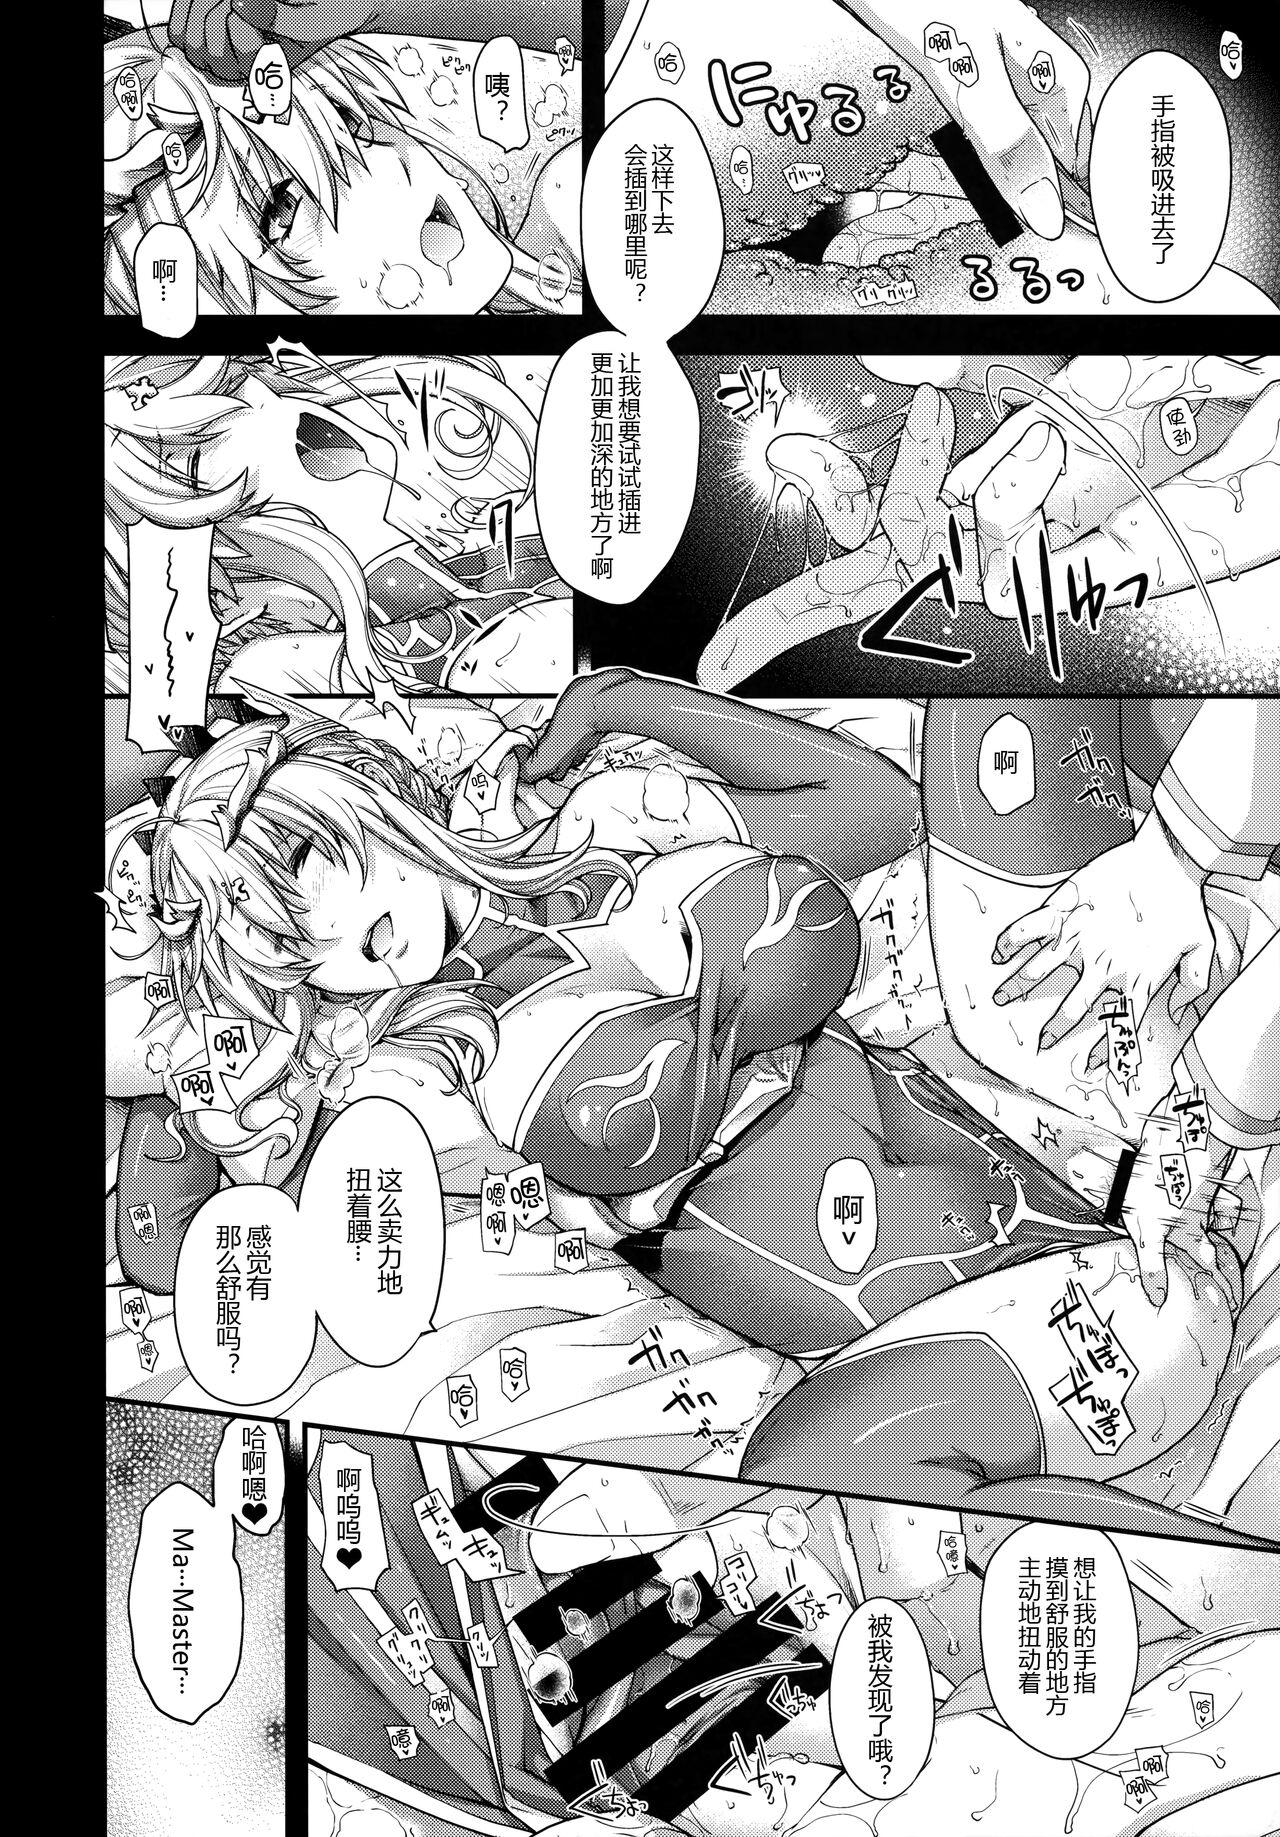 Hidden Camera Royal syndrome - Fate grand order Free Hardcore Porn - Page 11